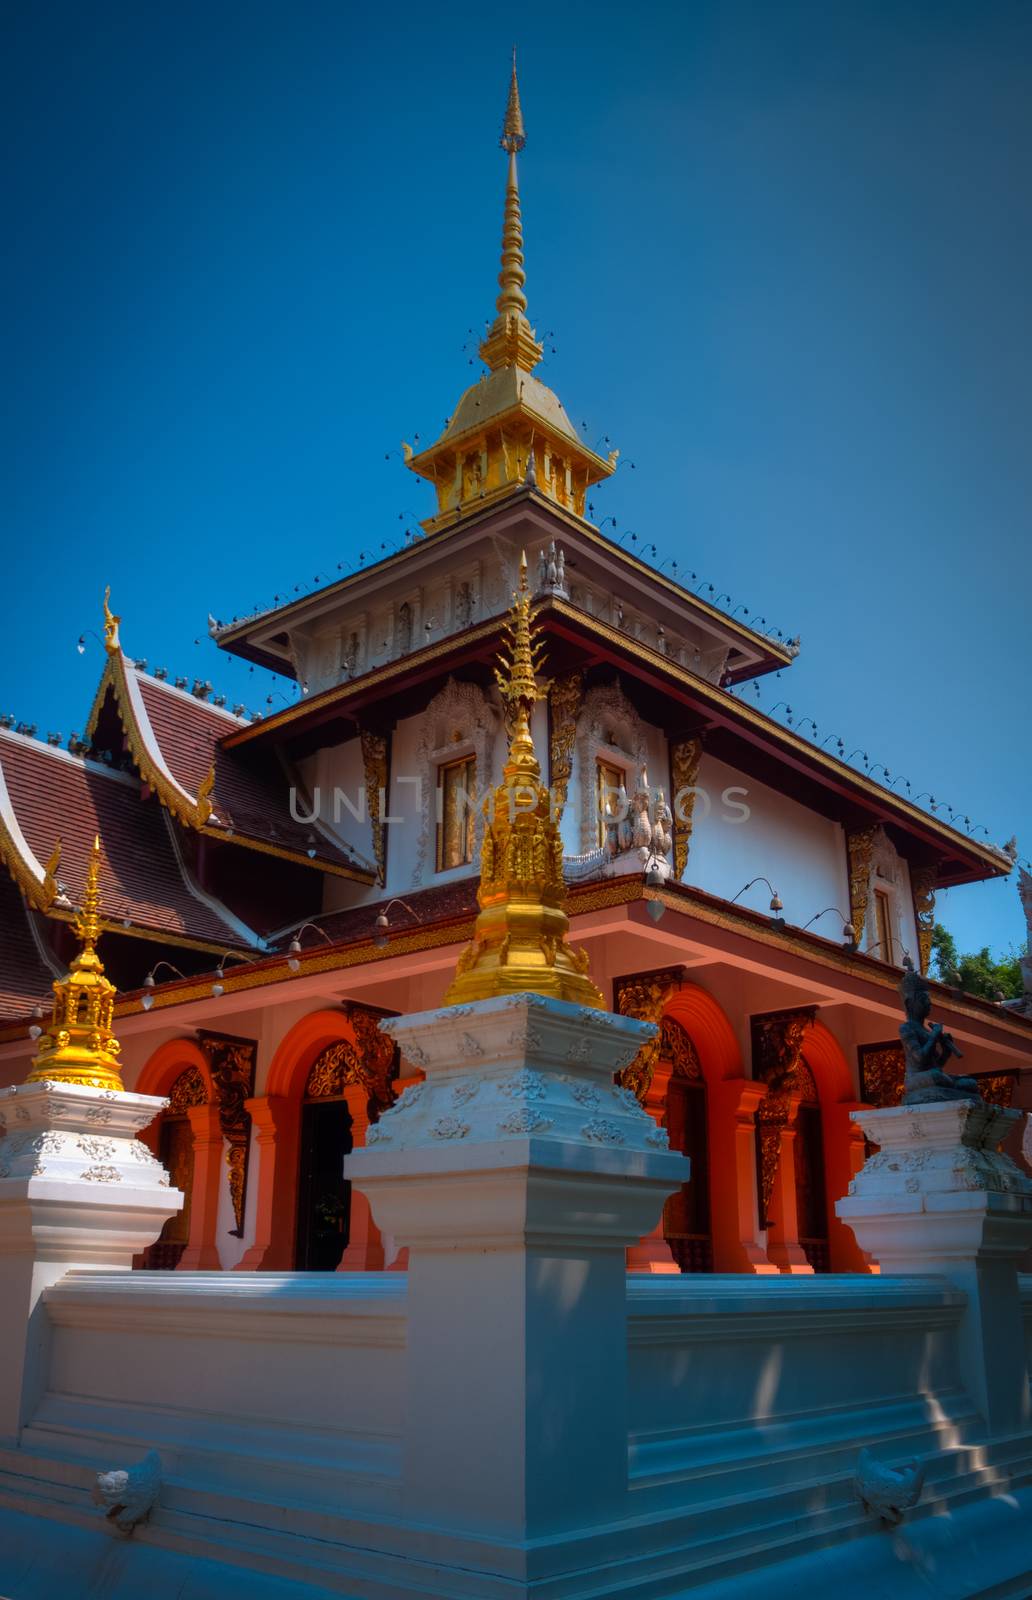 The North of Thailads style of temple